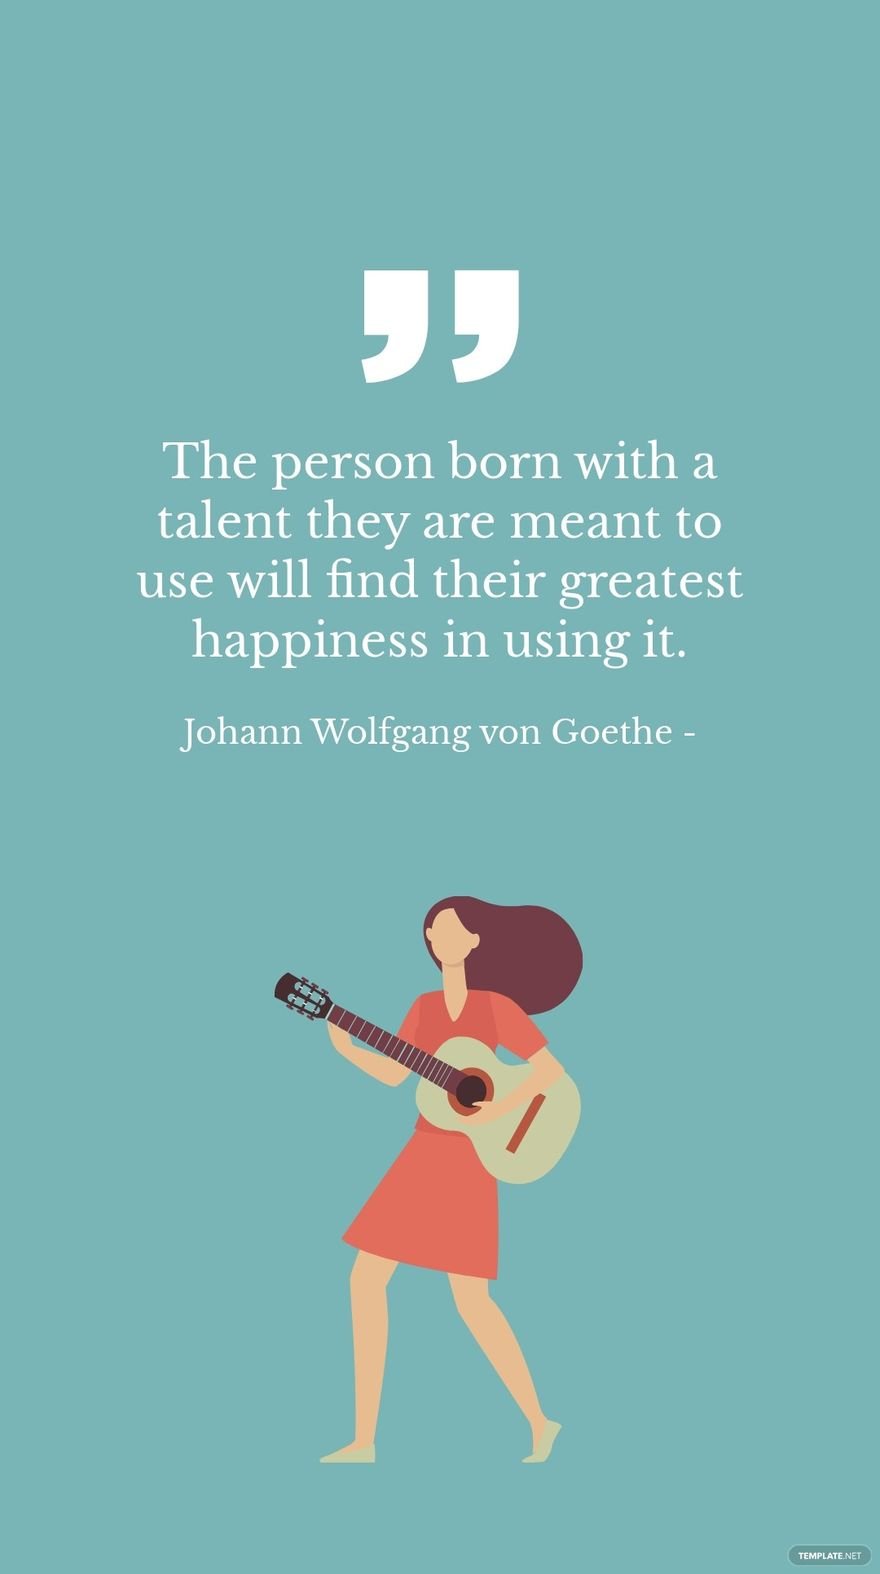 Johann Wolfgang von Goethe - The person born with a talent they are meant to use will find their greatest happiness in using it. in JPG